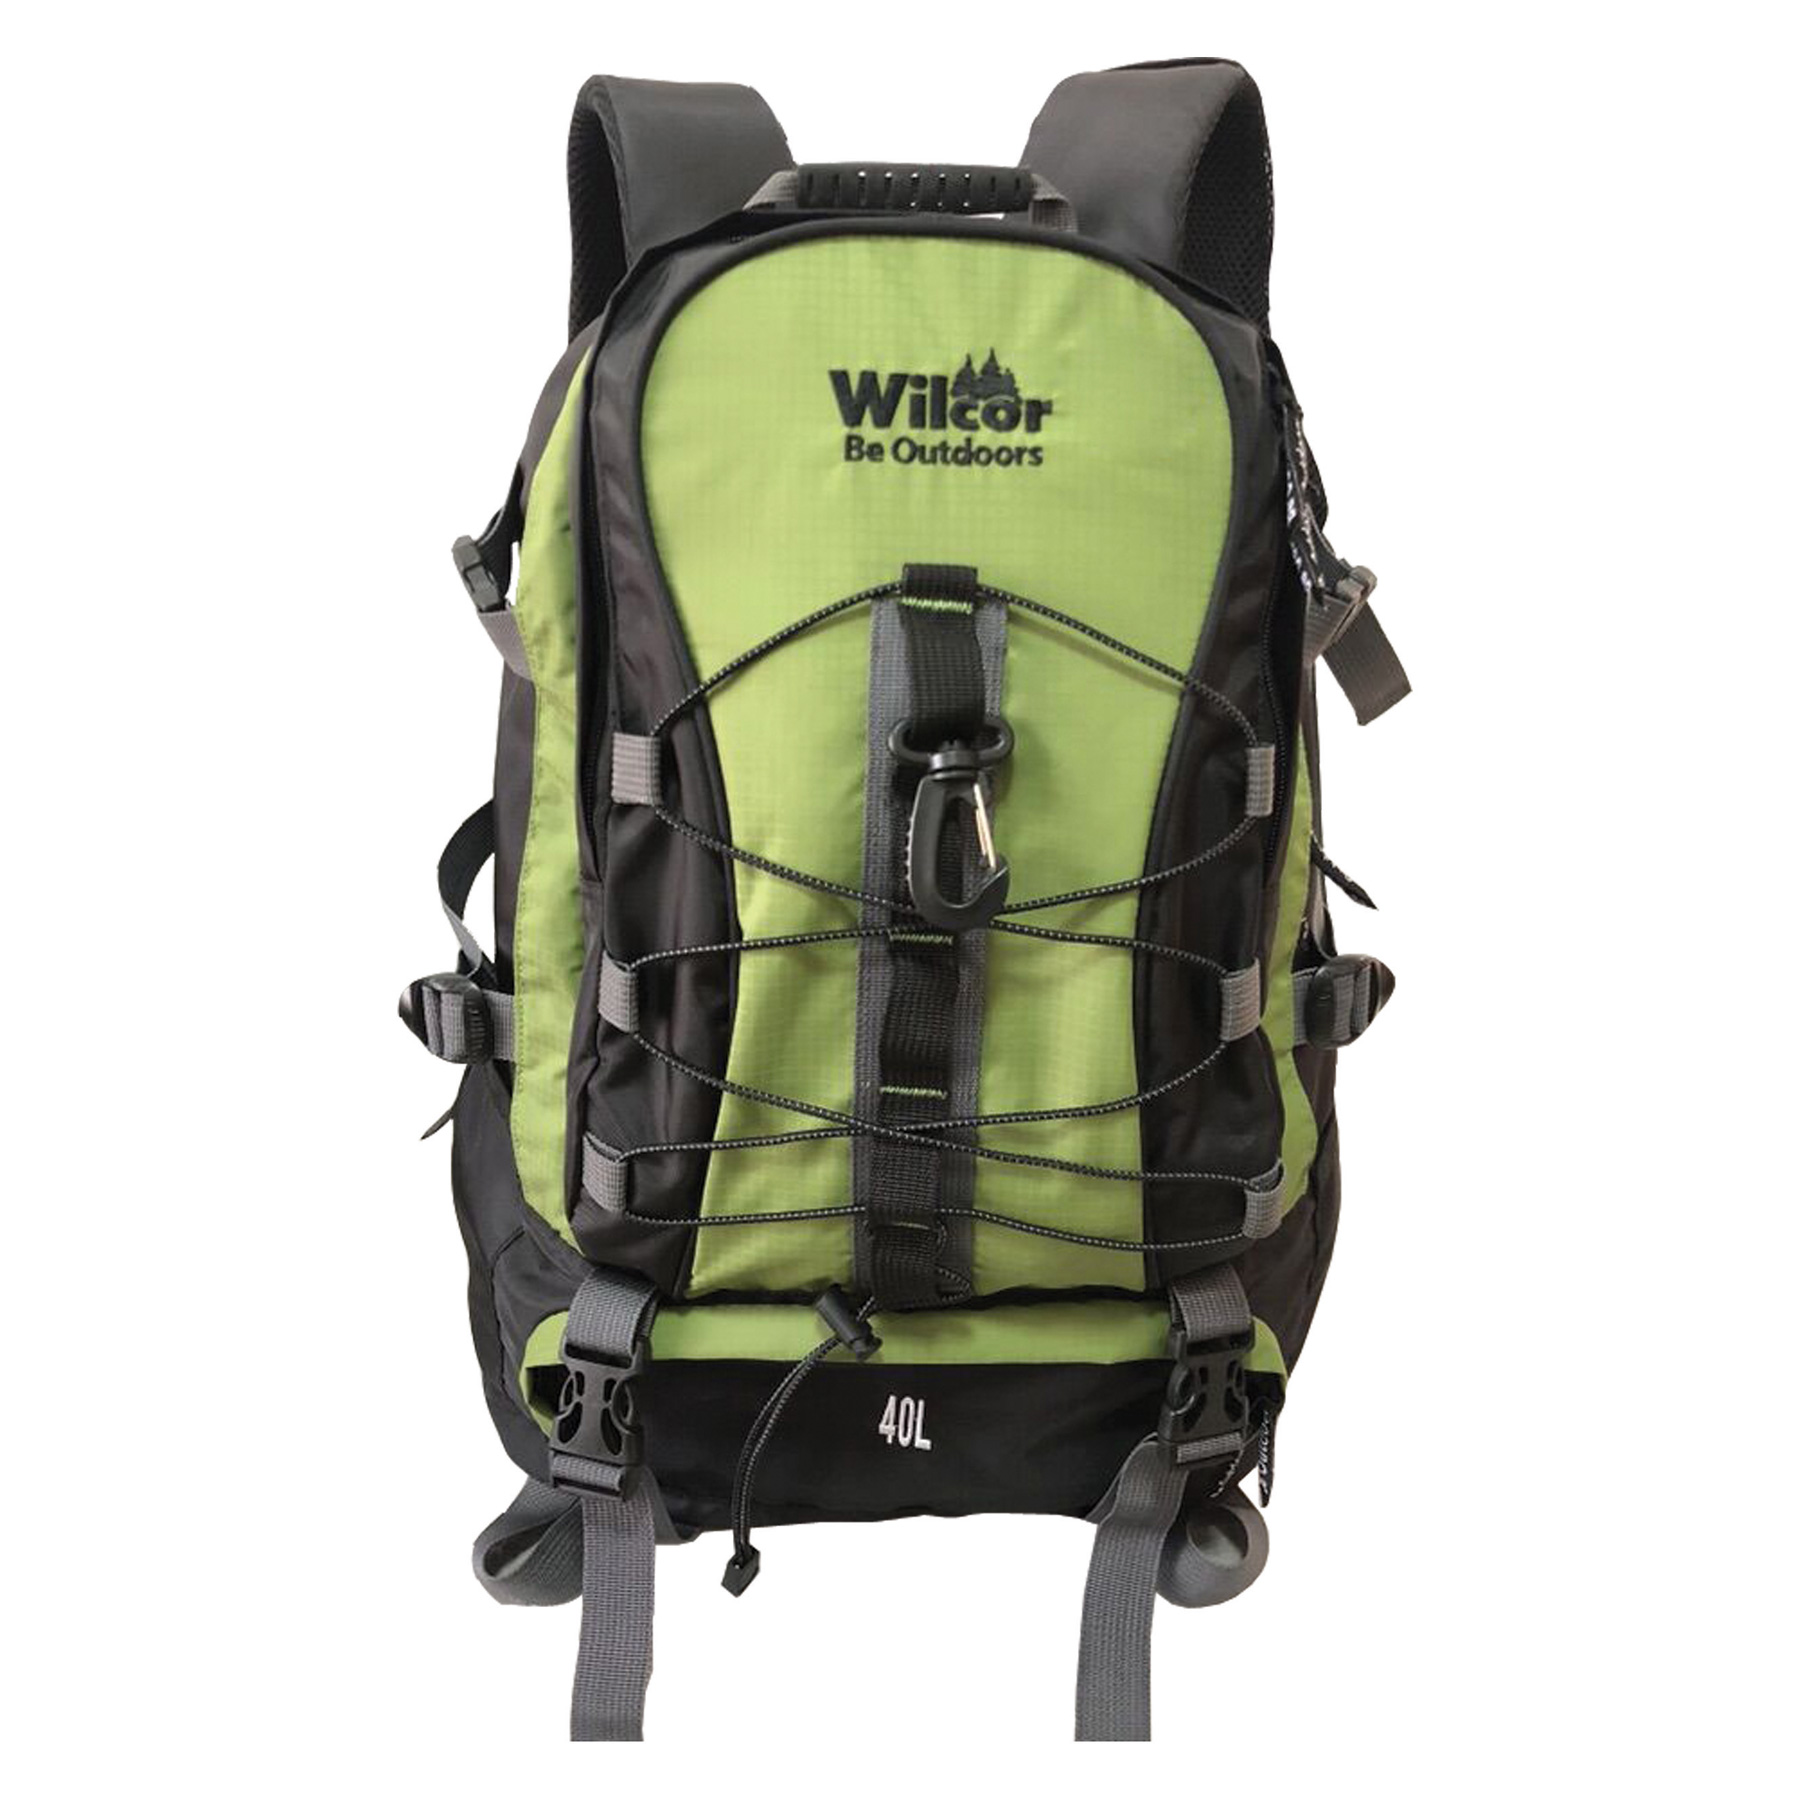 https://wilcor.net/productimages/cmp0452_trail_pack_dlx_green.jpg